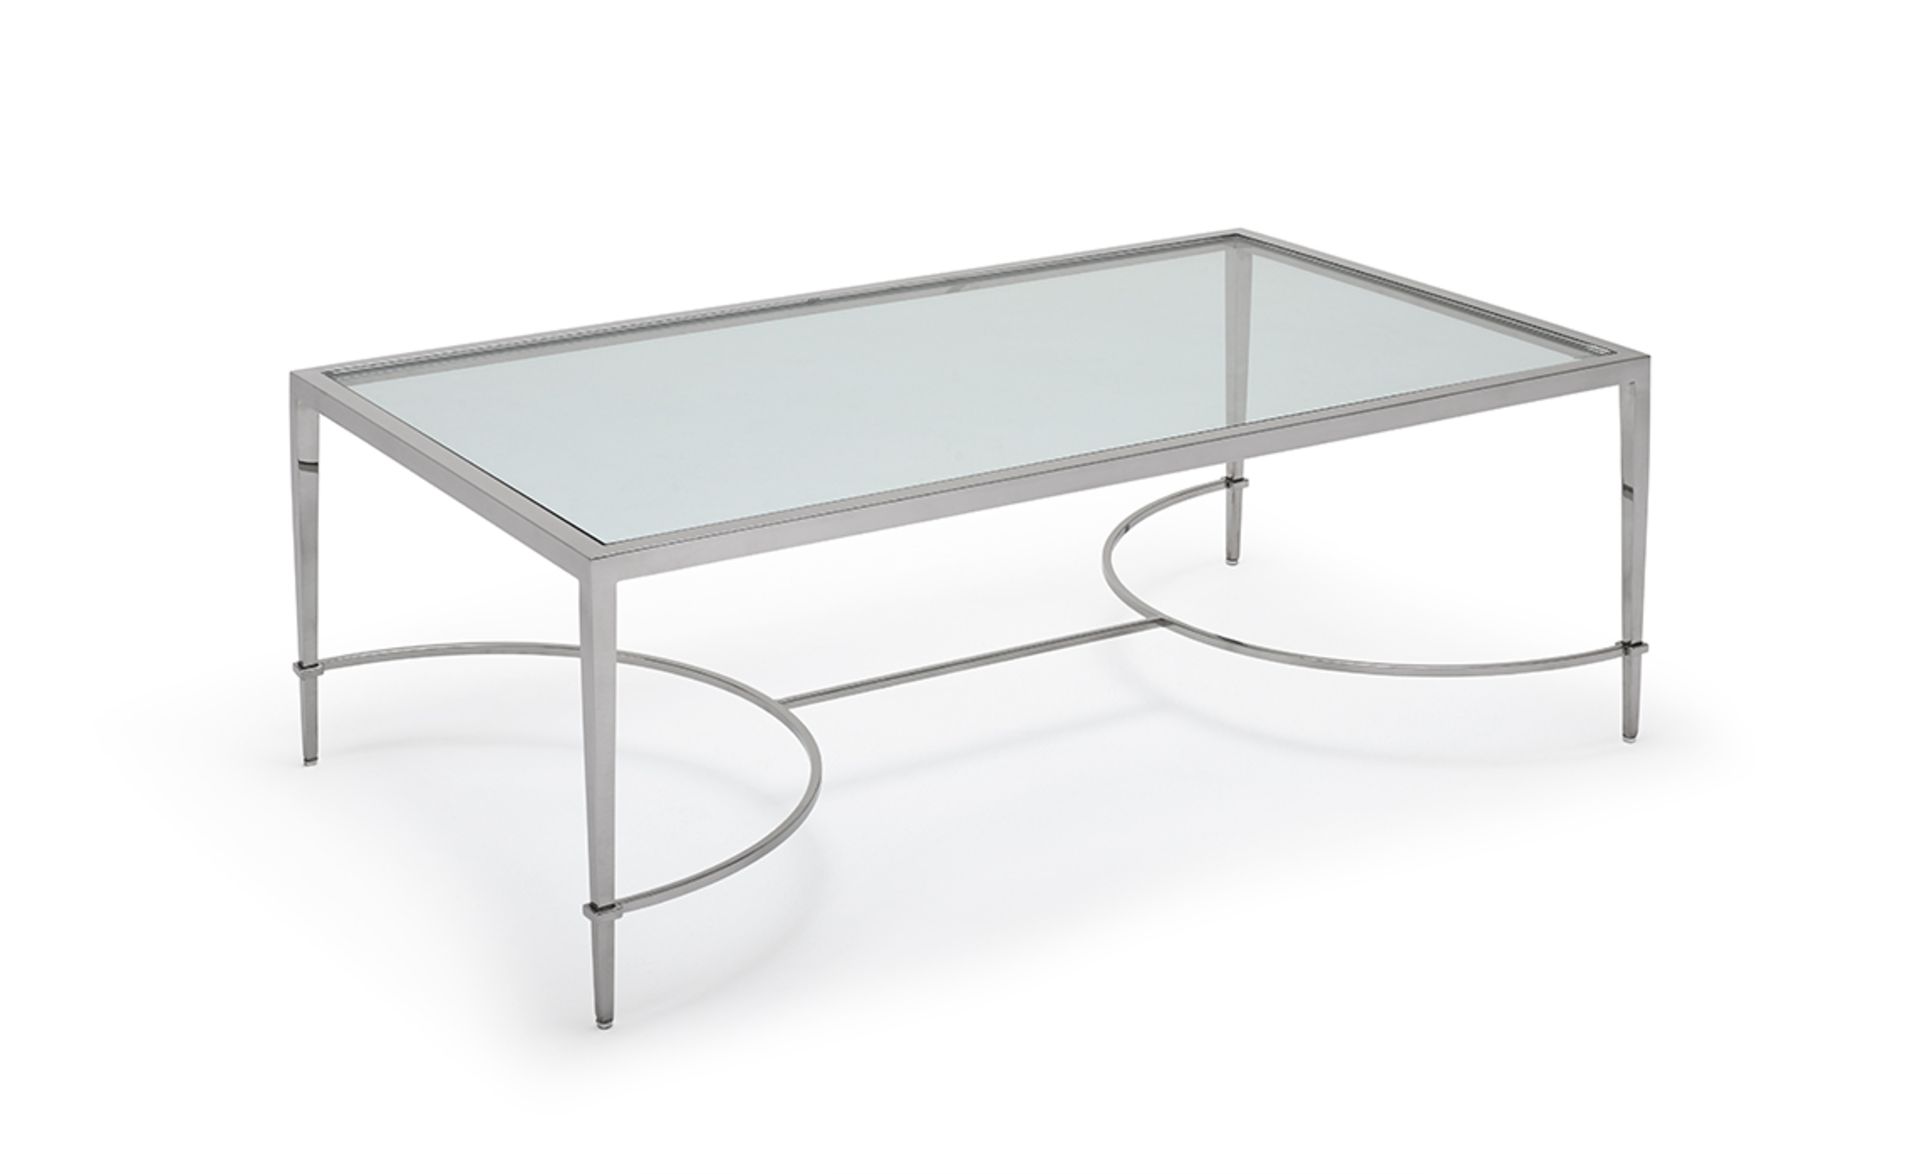 Tokyo Coffee Table by Kesterport The Tokyo coffee table with its clear glass top and a refined - Bild 4 aus 4